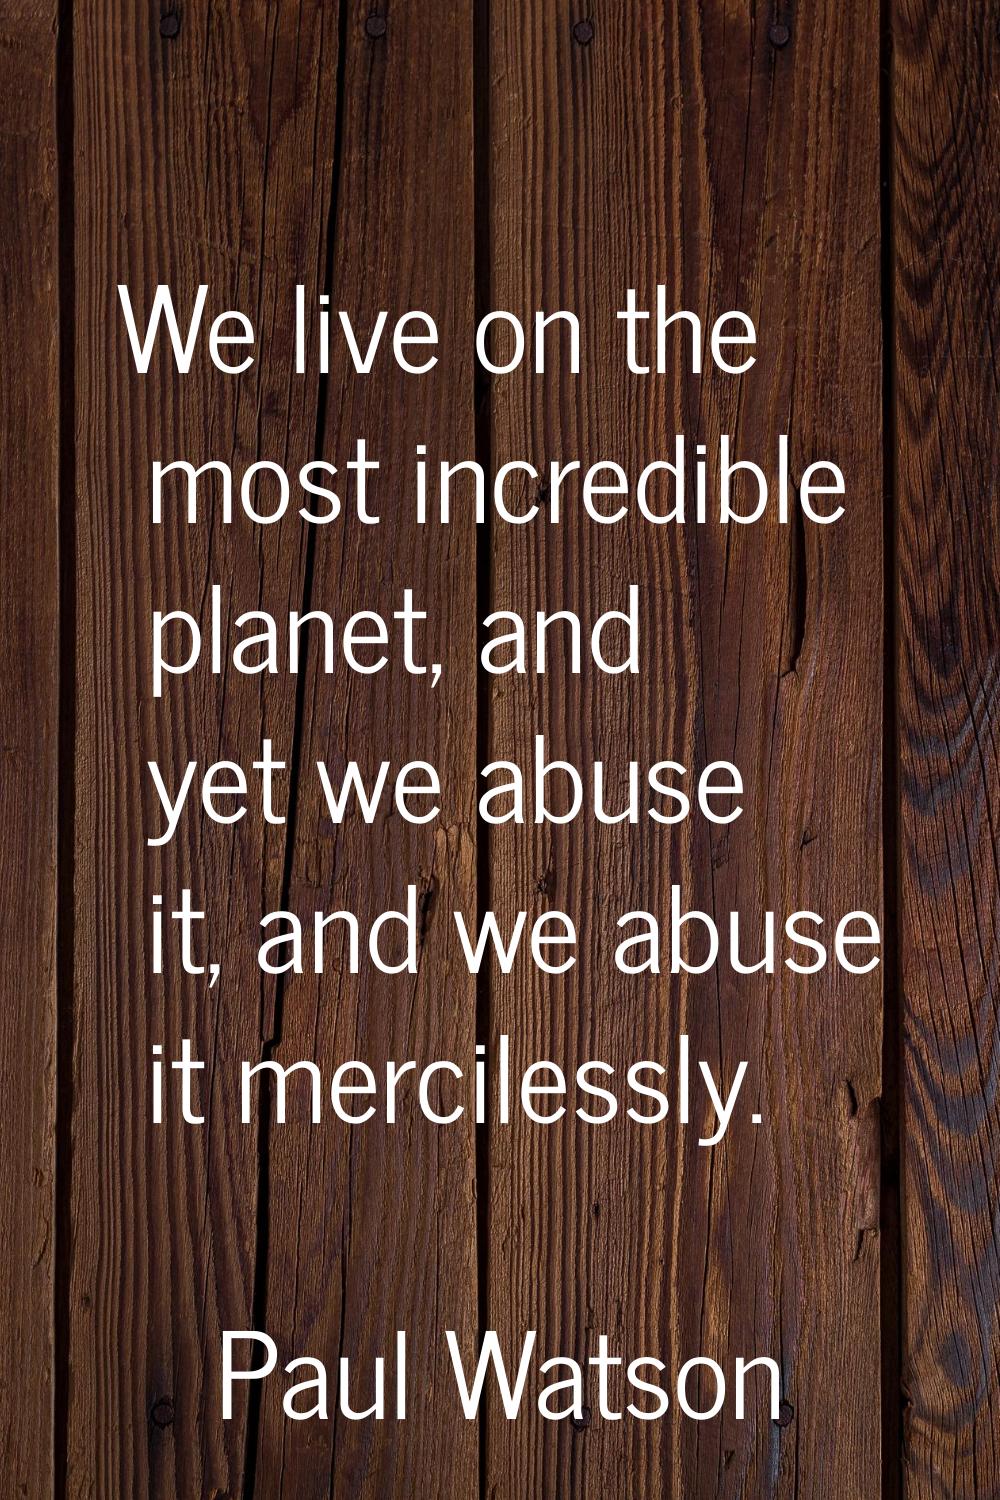 We live on the most incredible planet, and yet we abuse it, and we abuse it mercilessly.